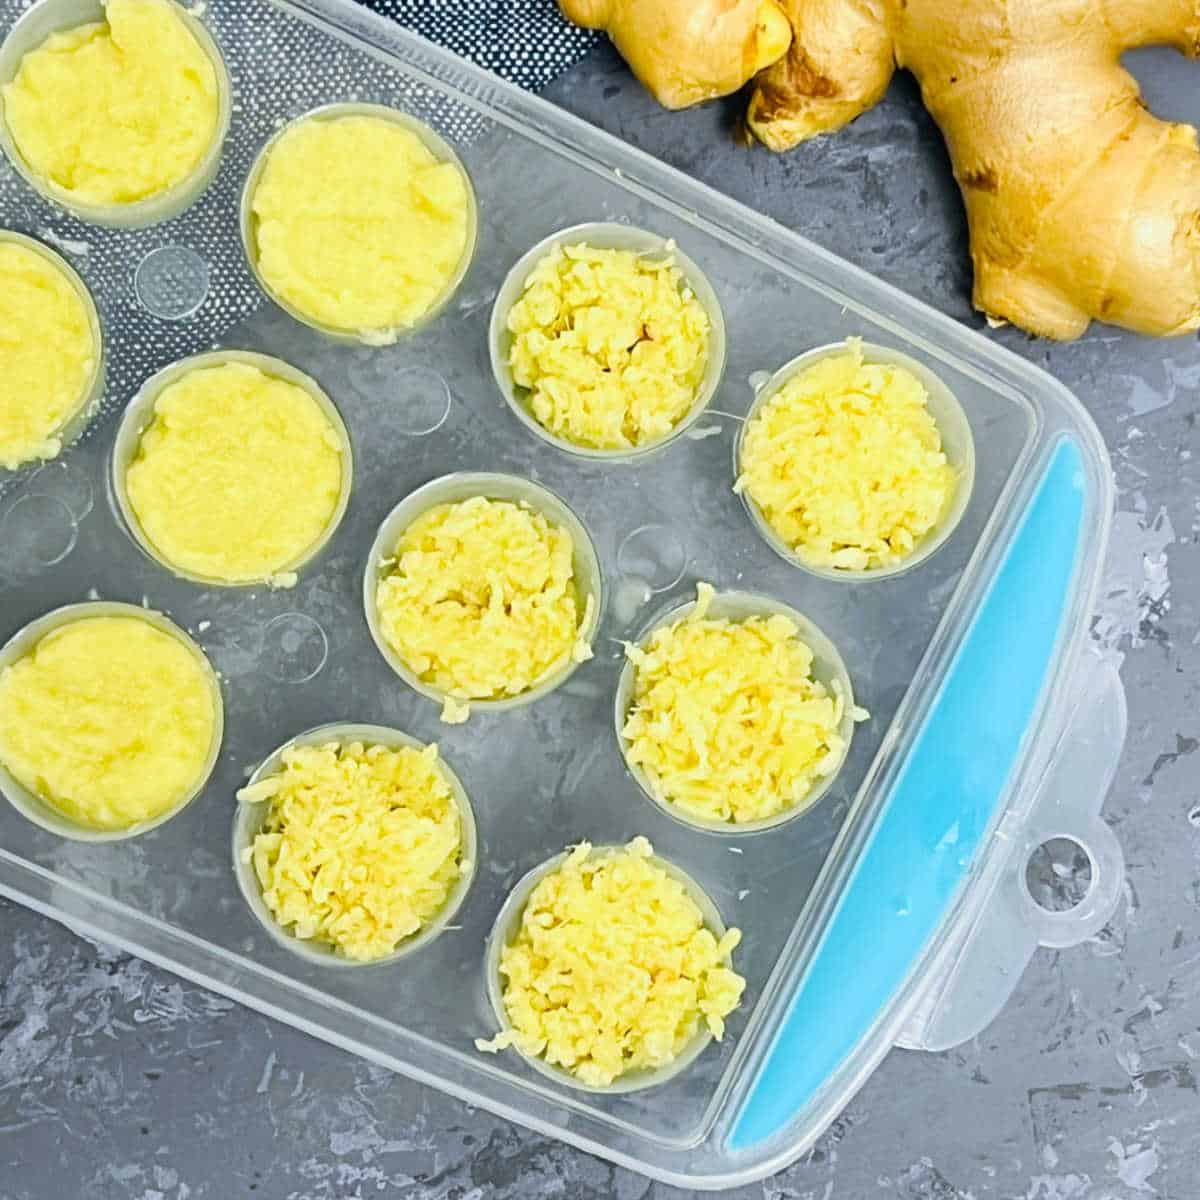 Ginger paste and grated in ice tray.